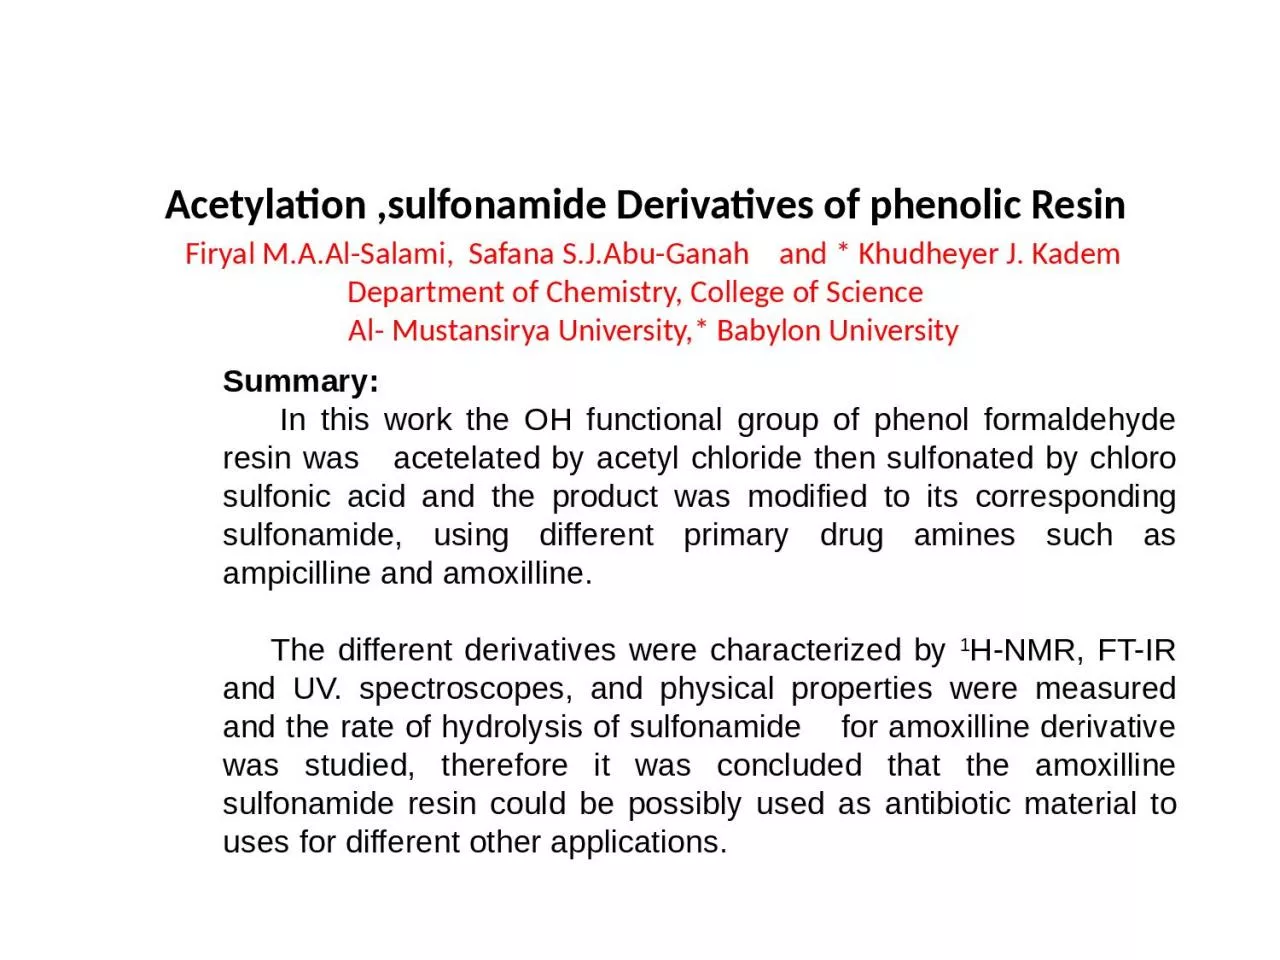 Acetylation  ,sulfonamide Derivatives of